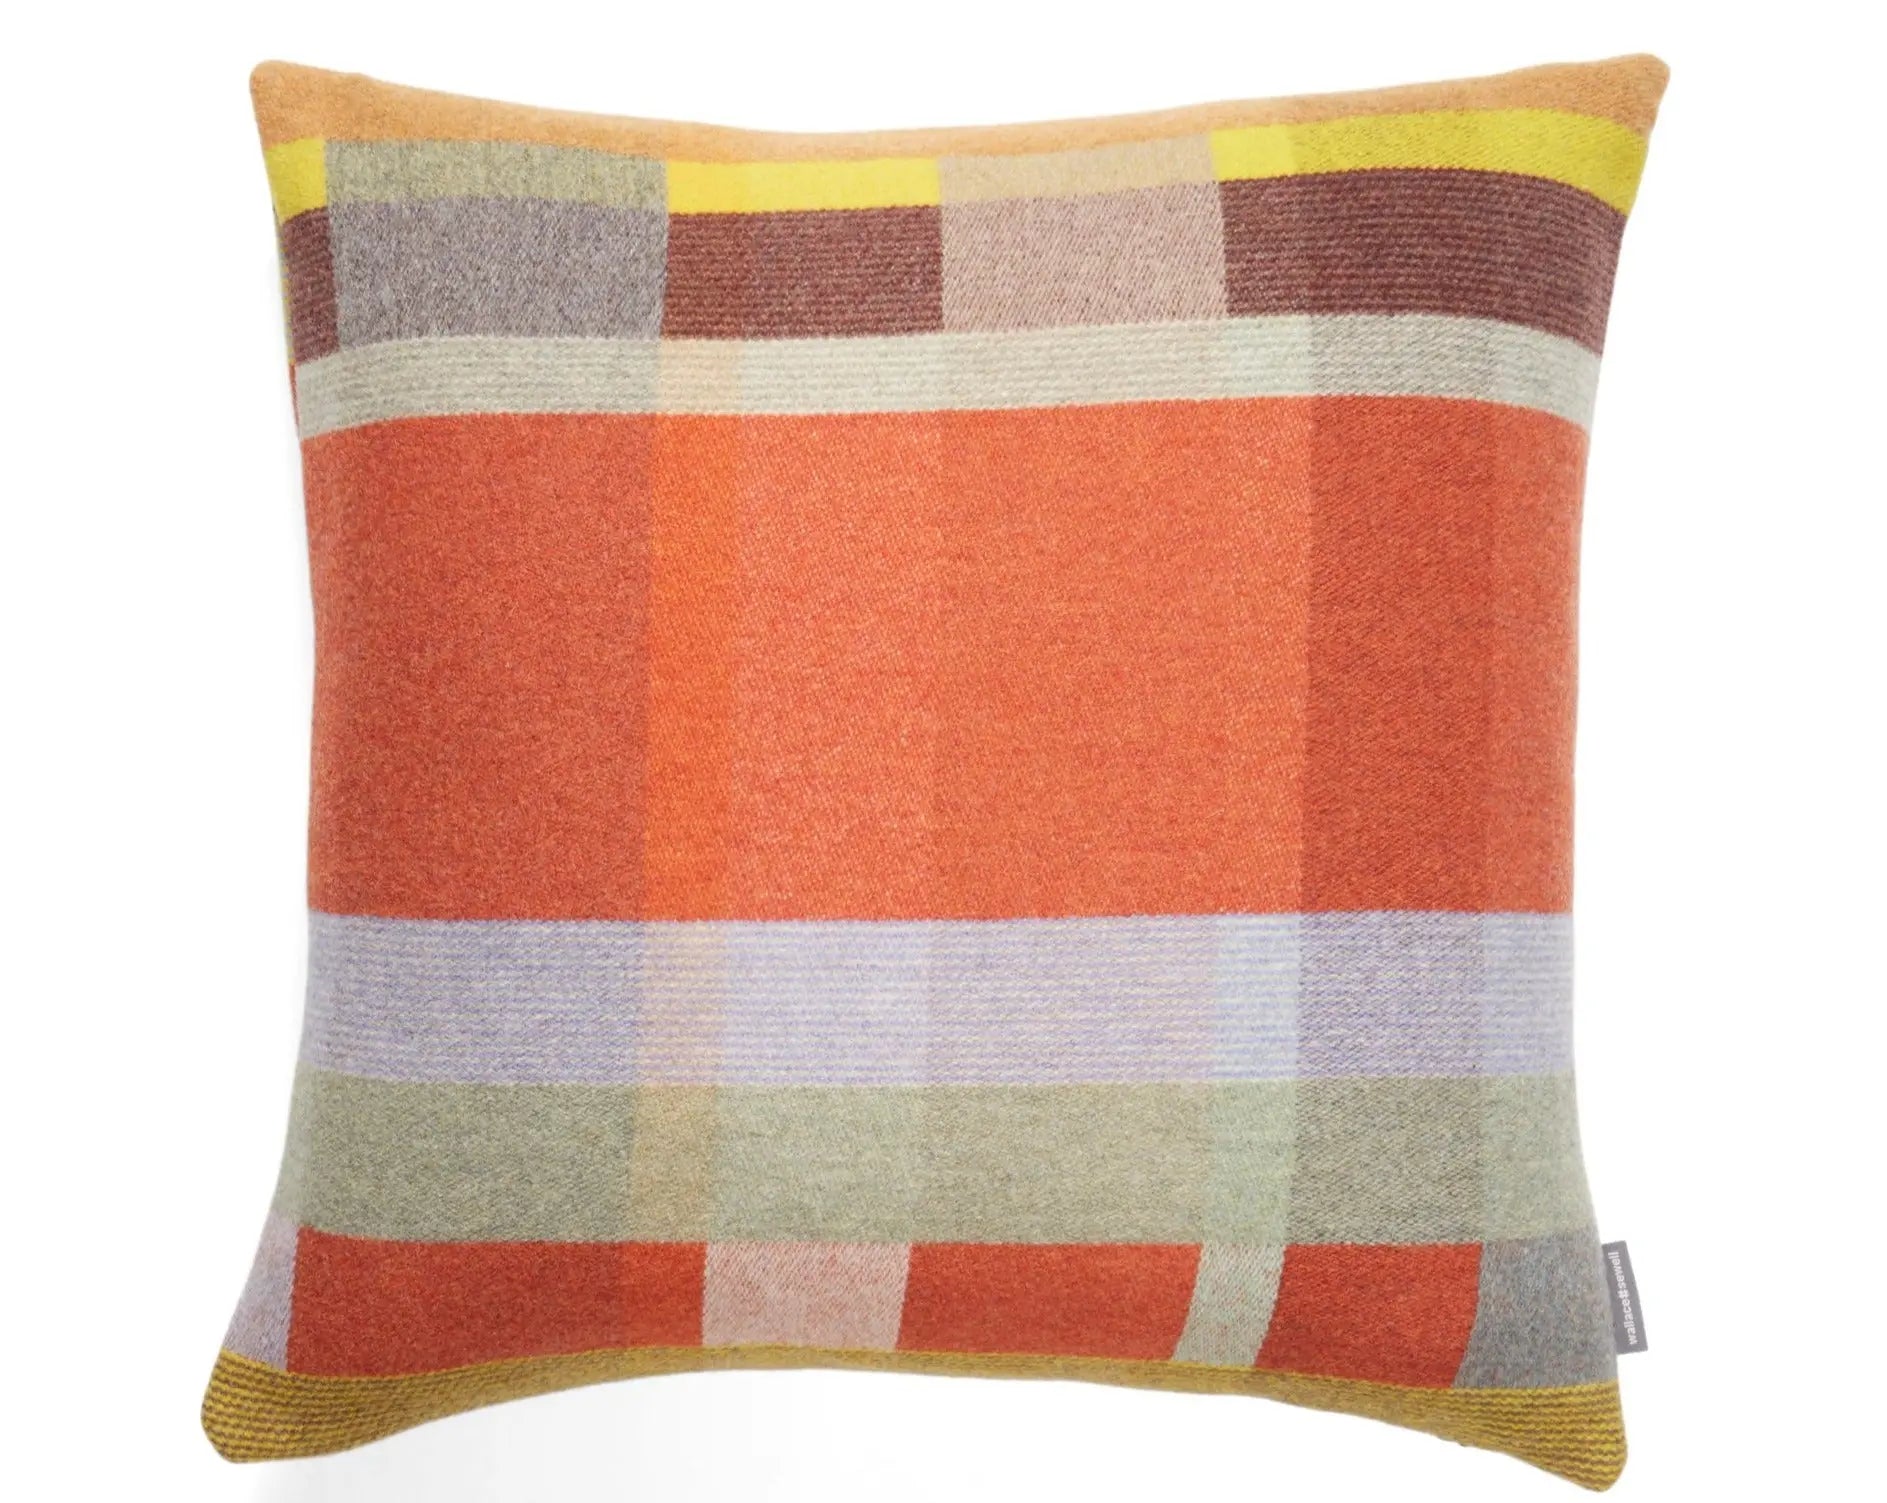 Wallace and Sewell-Cecil Cushion Wallace & Sewell